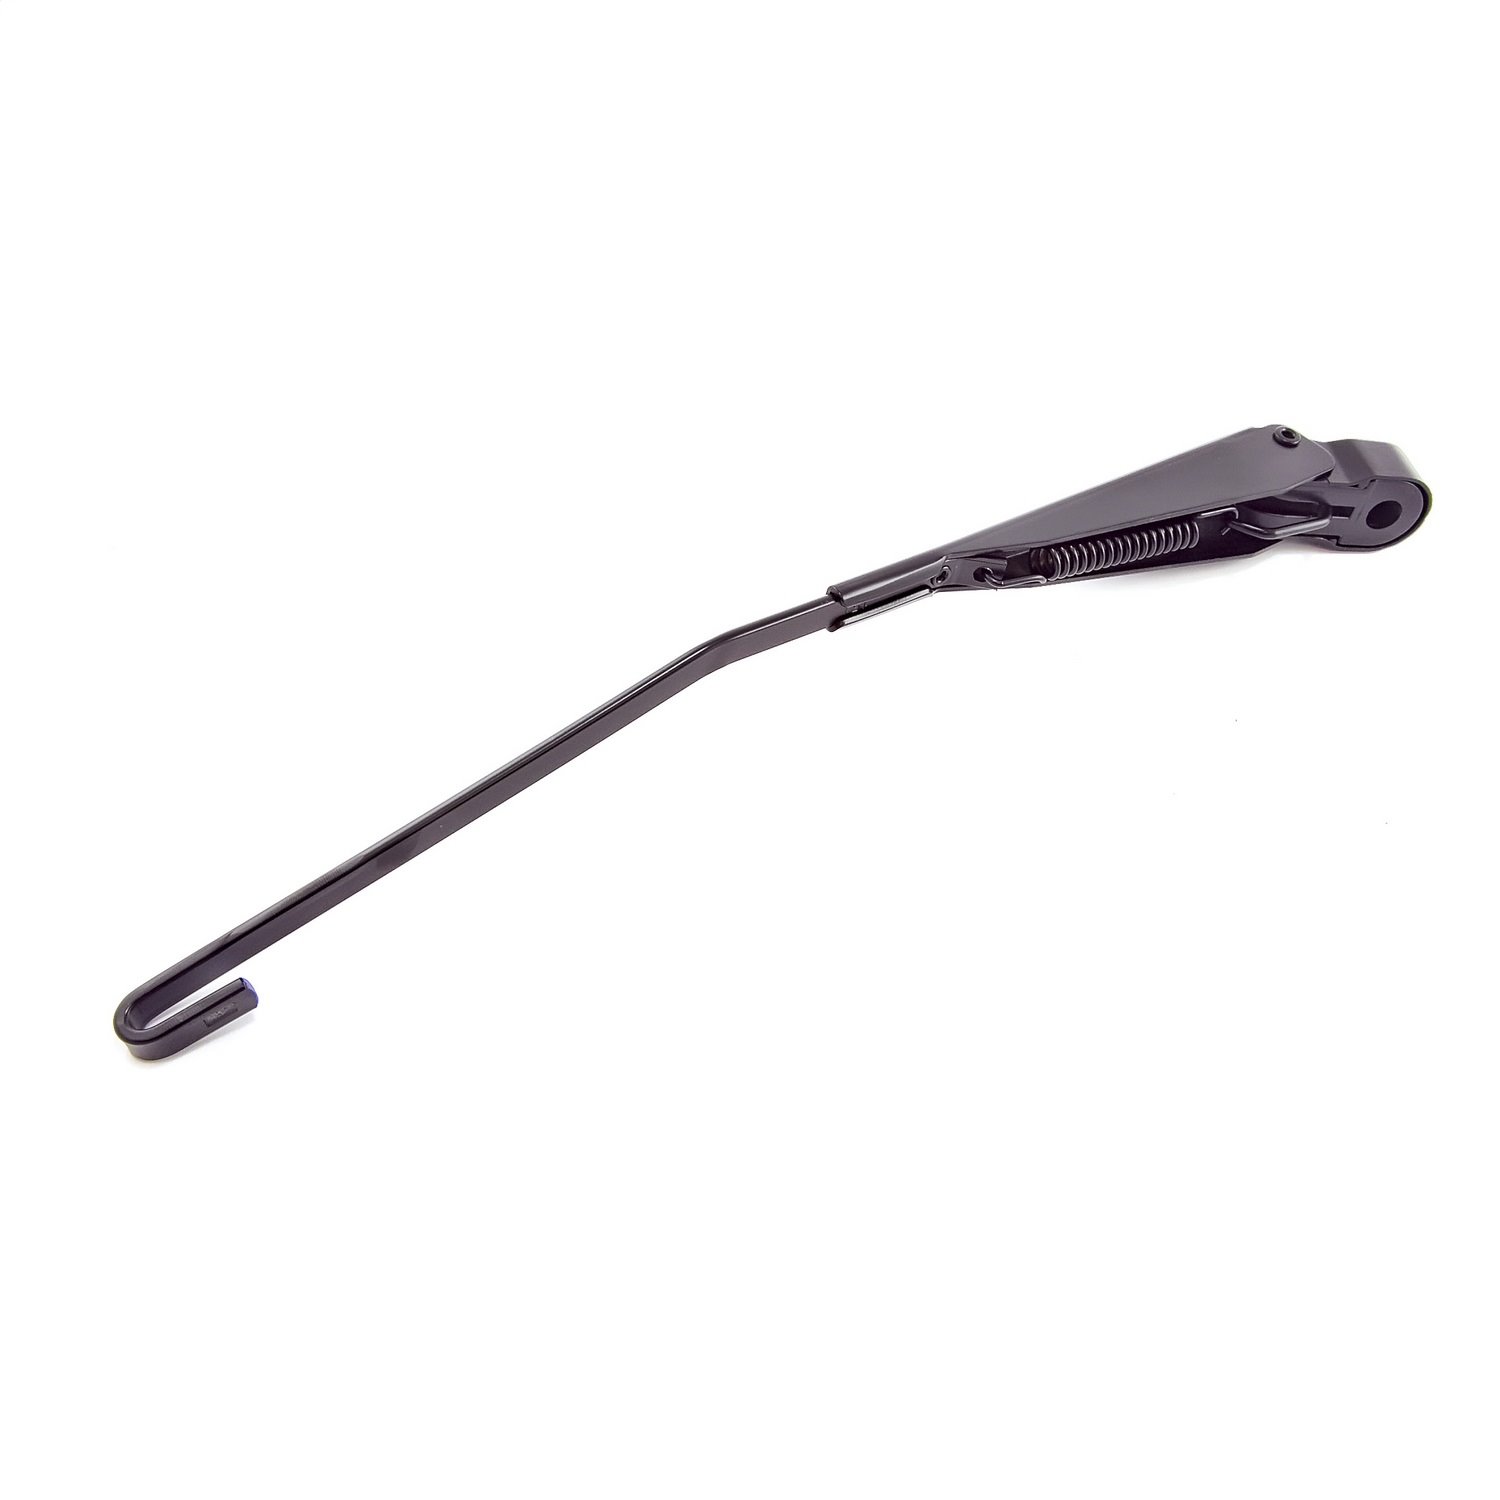 Replacement rear windshield wiper arm from Omix-ADA, Fits 94-95 Jeep Grand Cherokees without a flip-open rear window.